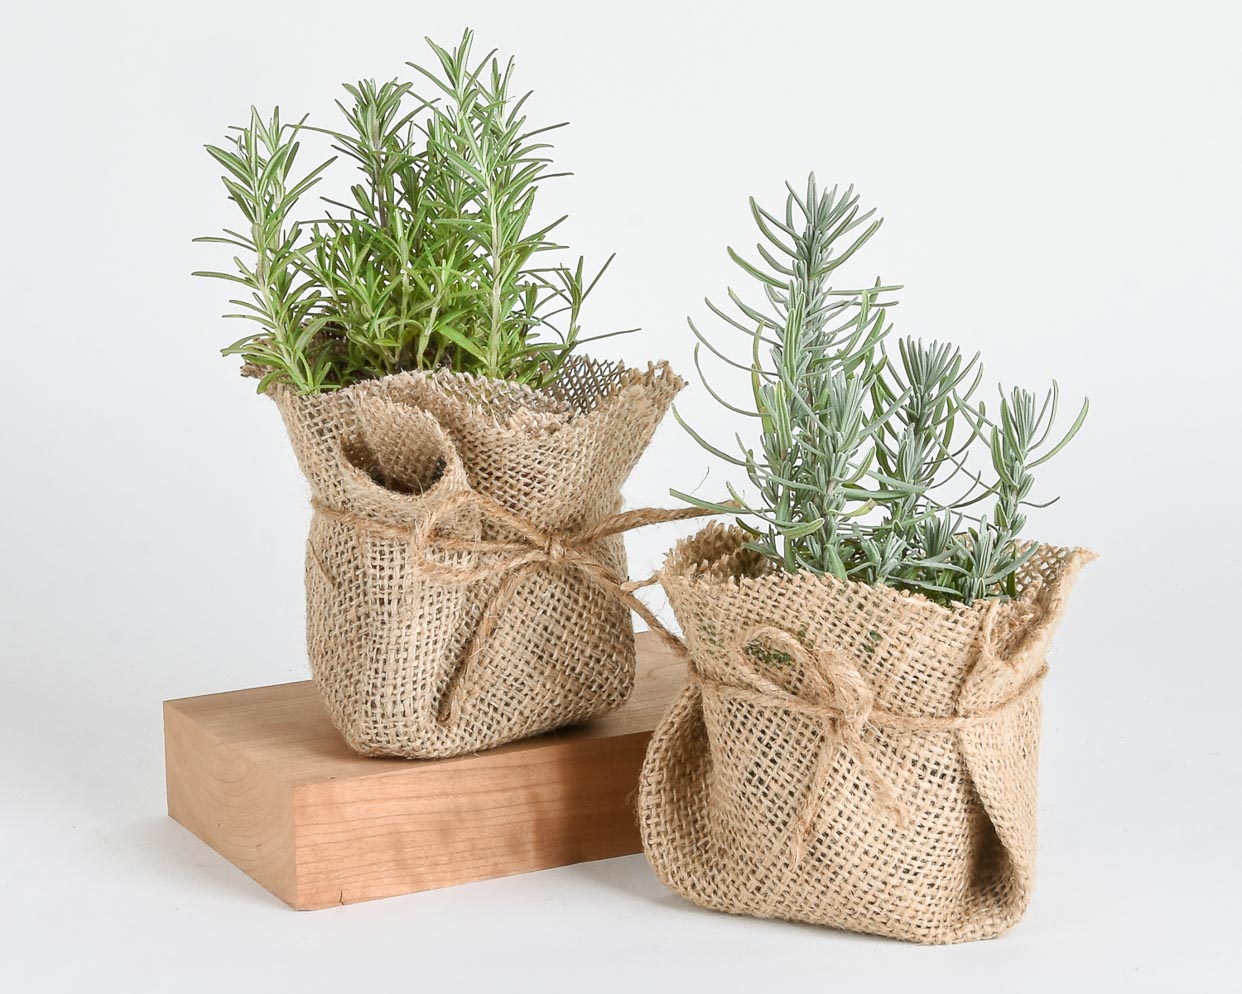 A Very Shippable Houseplant Holiday Gift Guide - Pistils Nursery